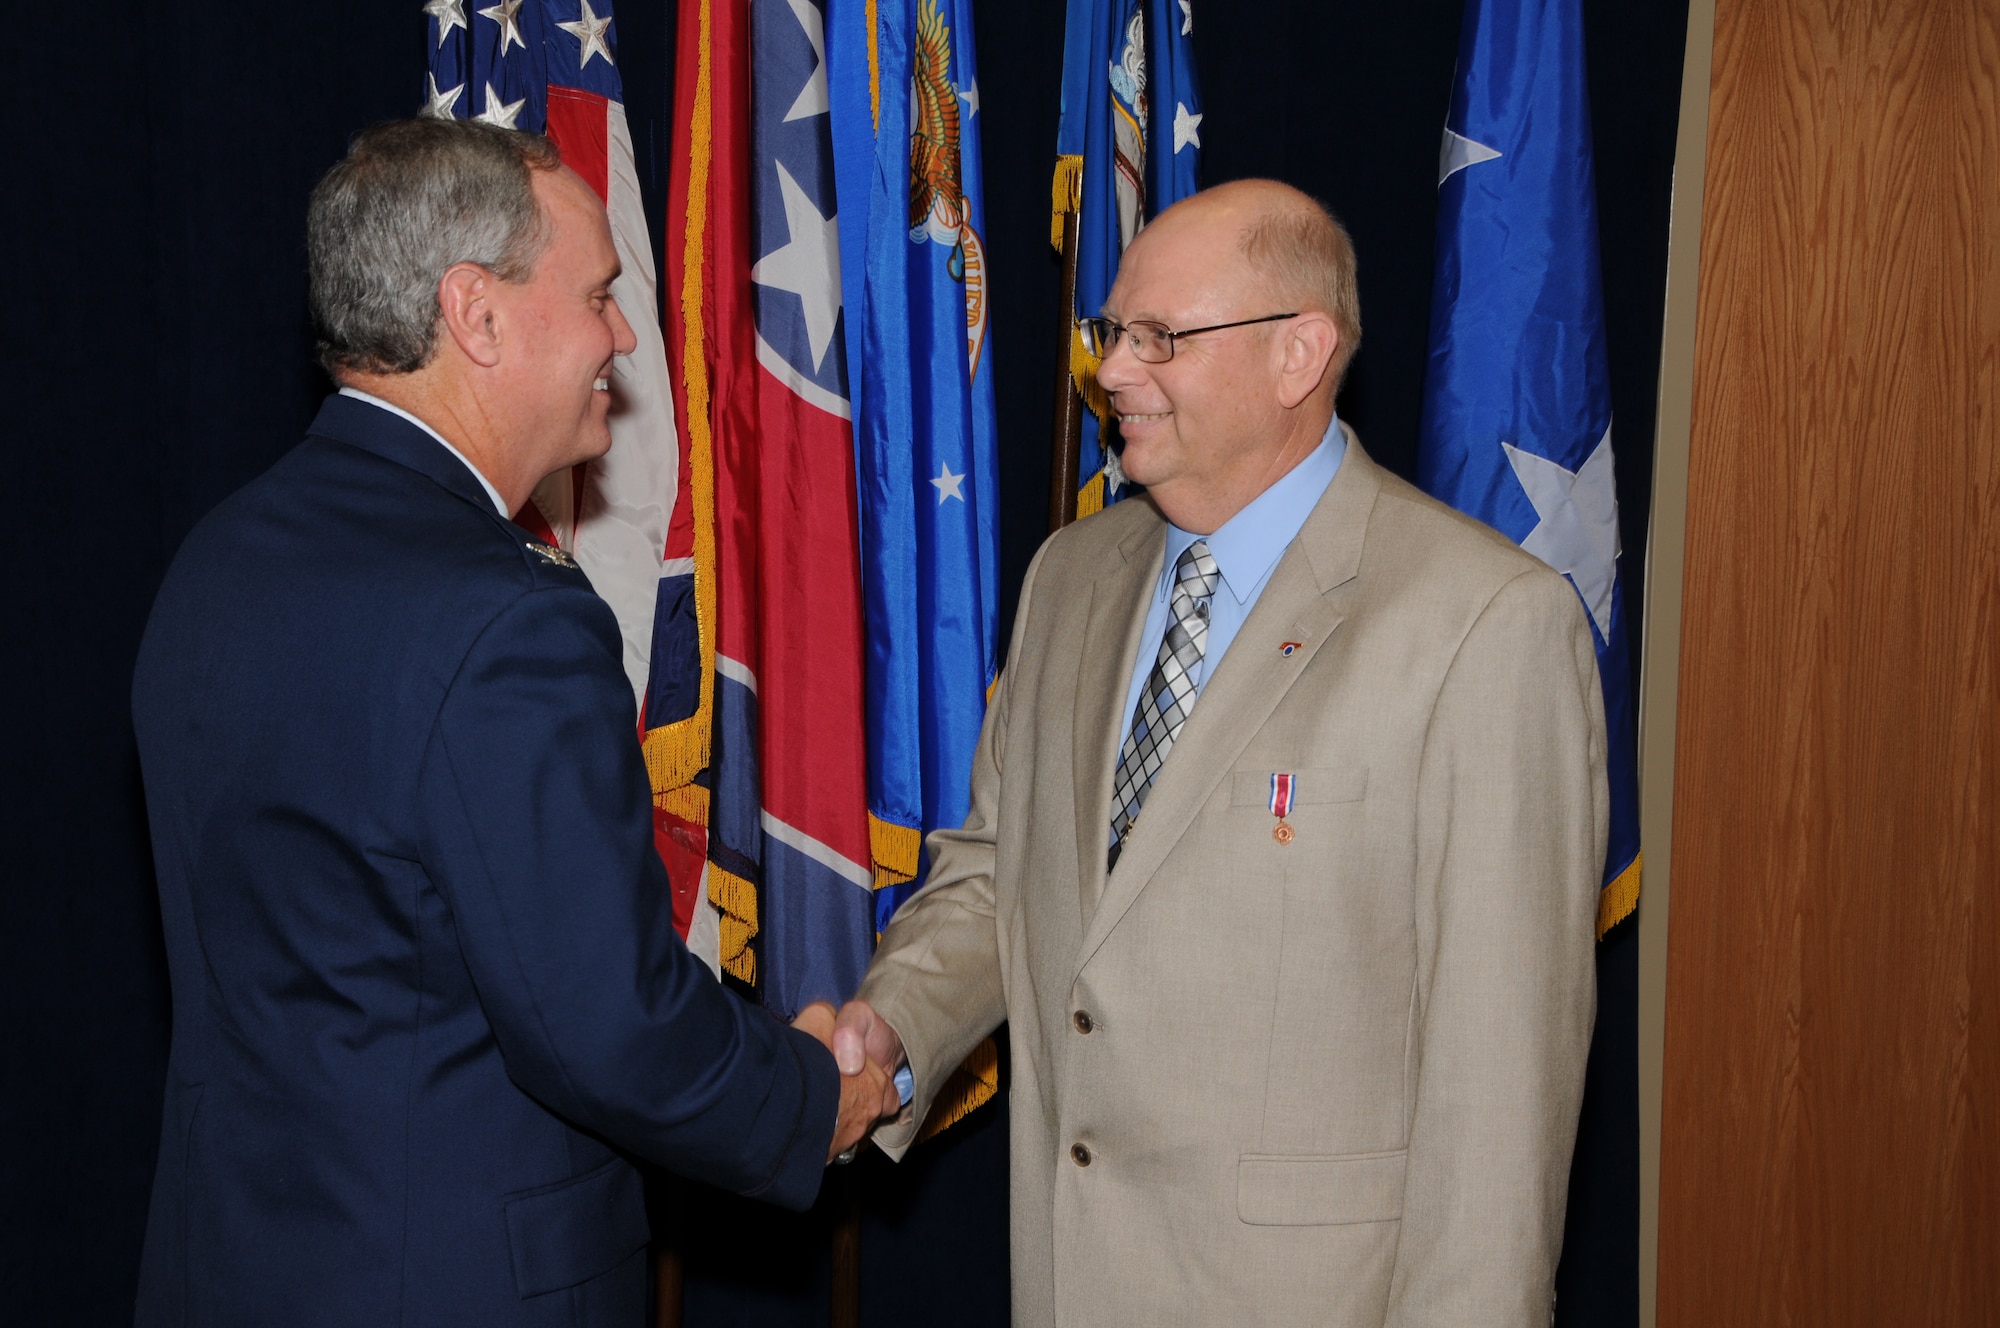 Colonel Harry D. Montgomery, 164th Airlift Wing Commander, presents the Tennessee National Guard Distinguished Service Medal to Lieutenant Colonel Lamar Spencer during Col Spencer's retirement ceremony.